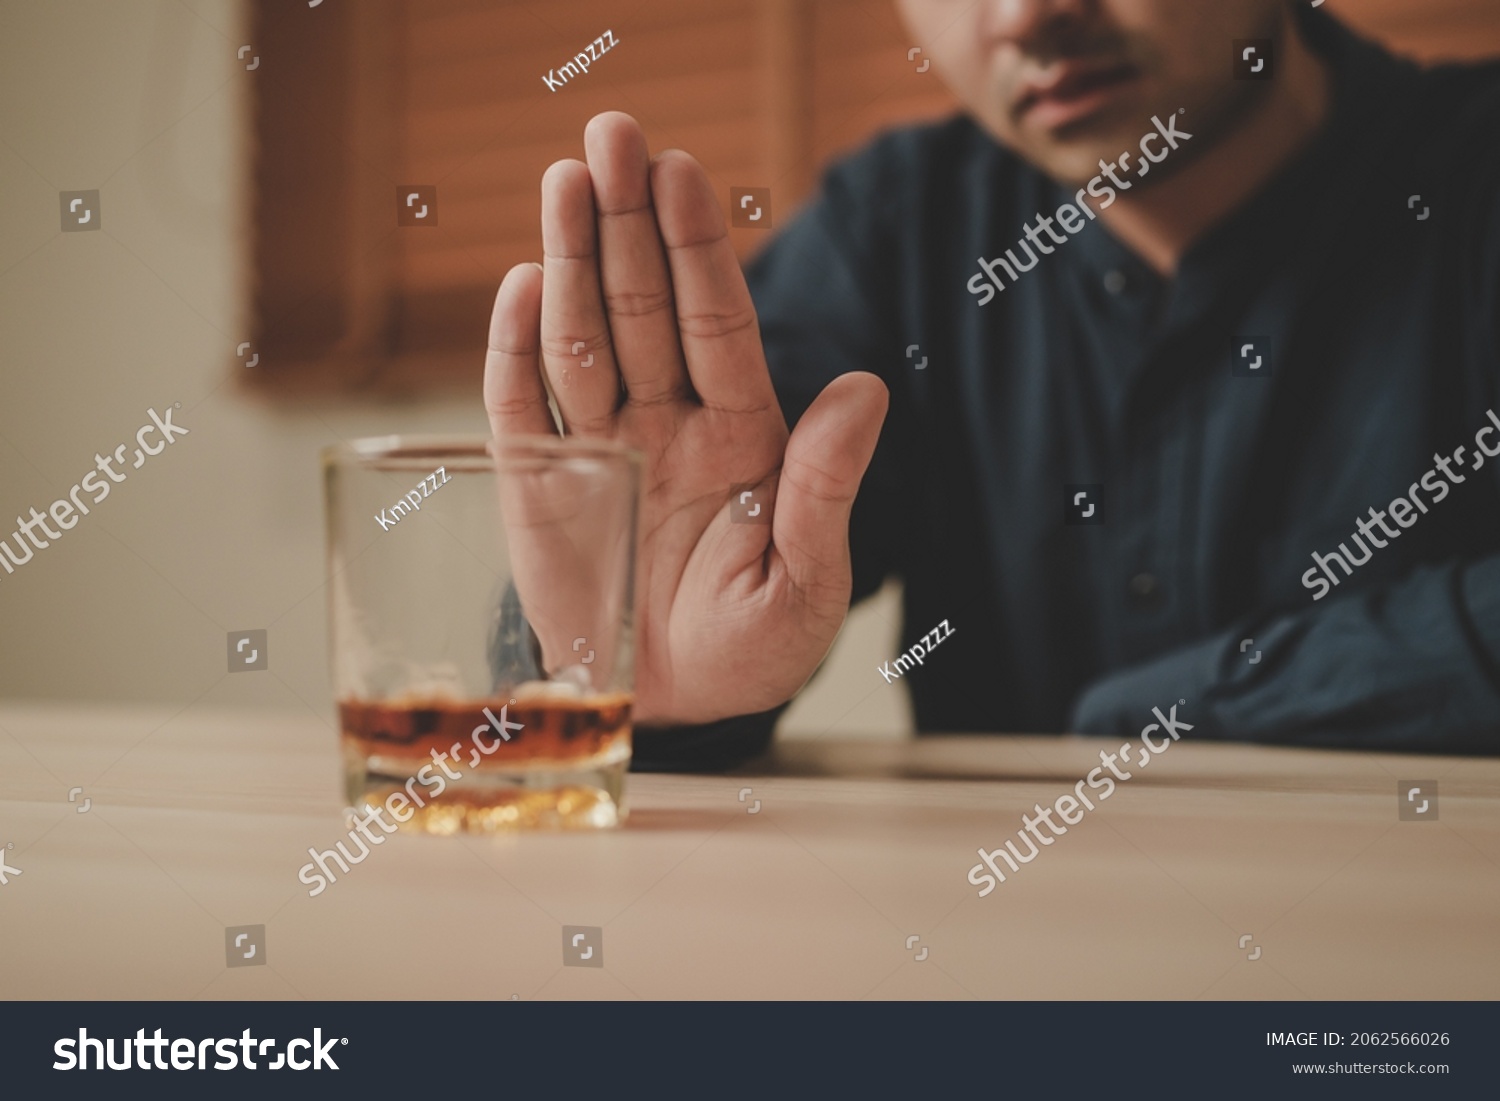 Alcoholism, sad depressed asian young man refuse, push alcoholic beverage glass, drink whiskey, sitting alone at night. Treatment of alcohol addiction, having suffer abuse problem alcoholism concept. #2062566026